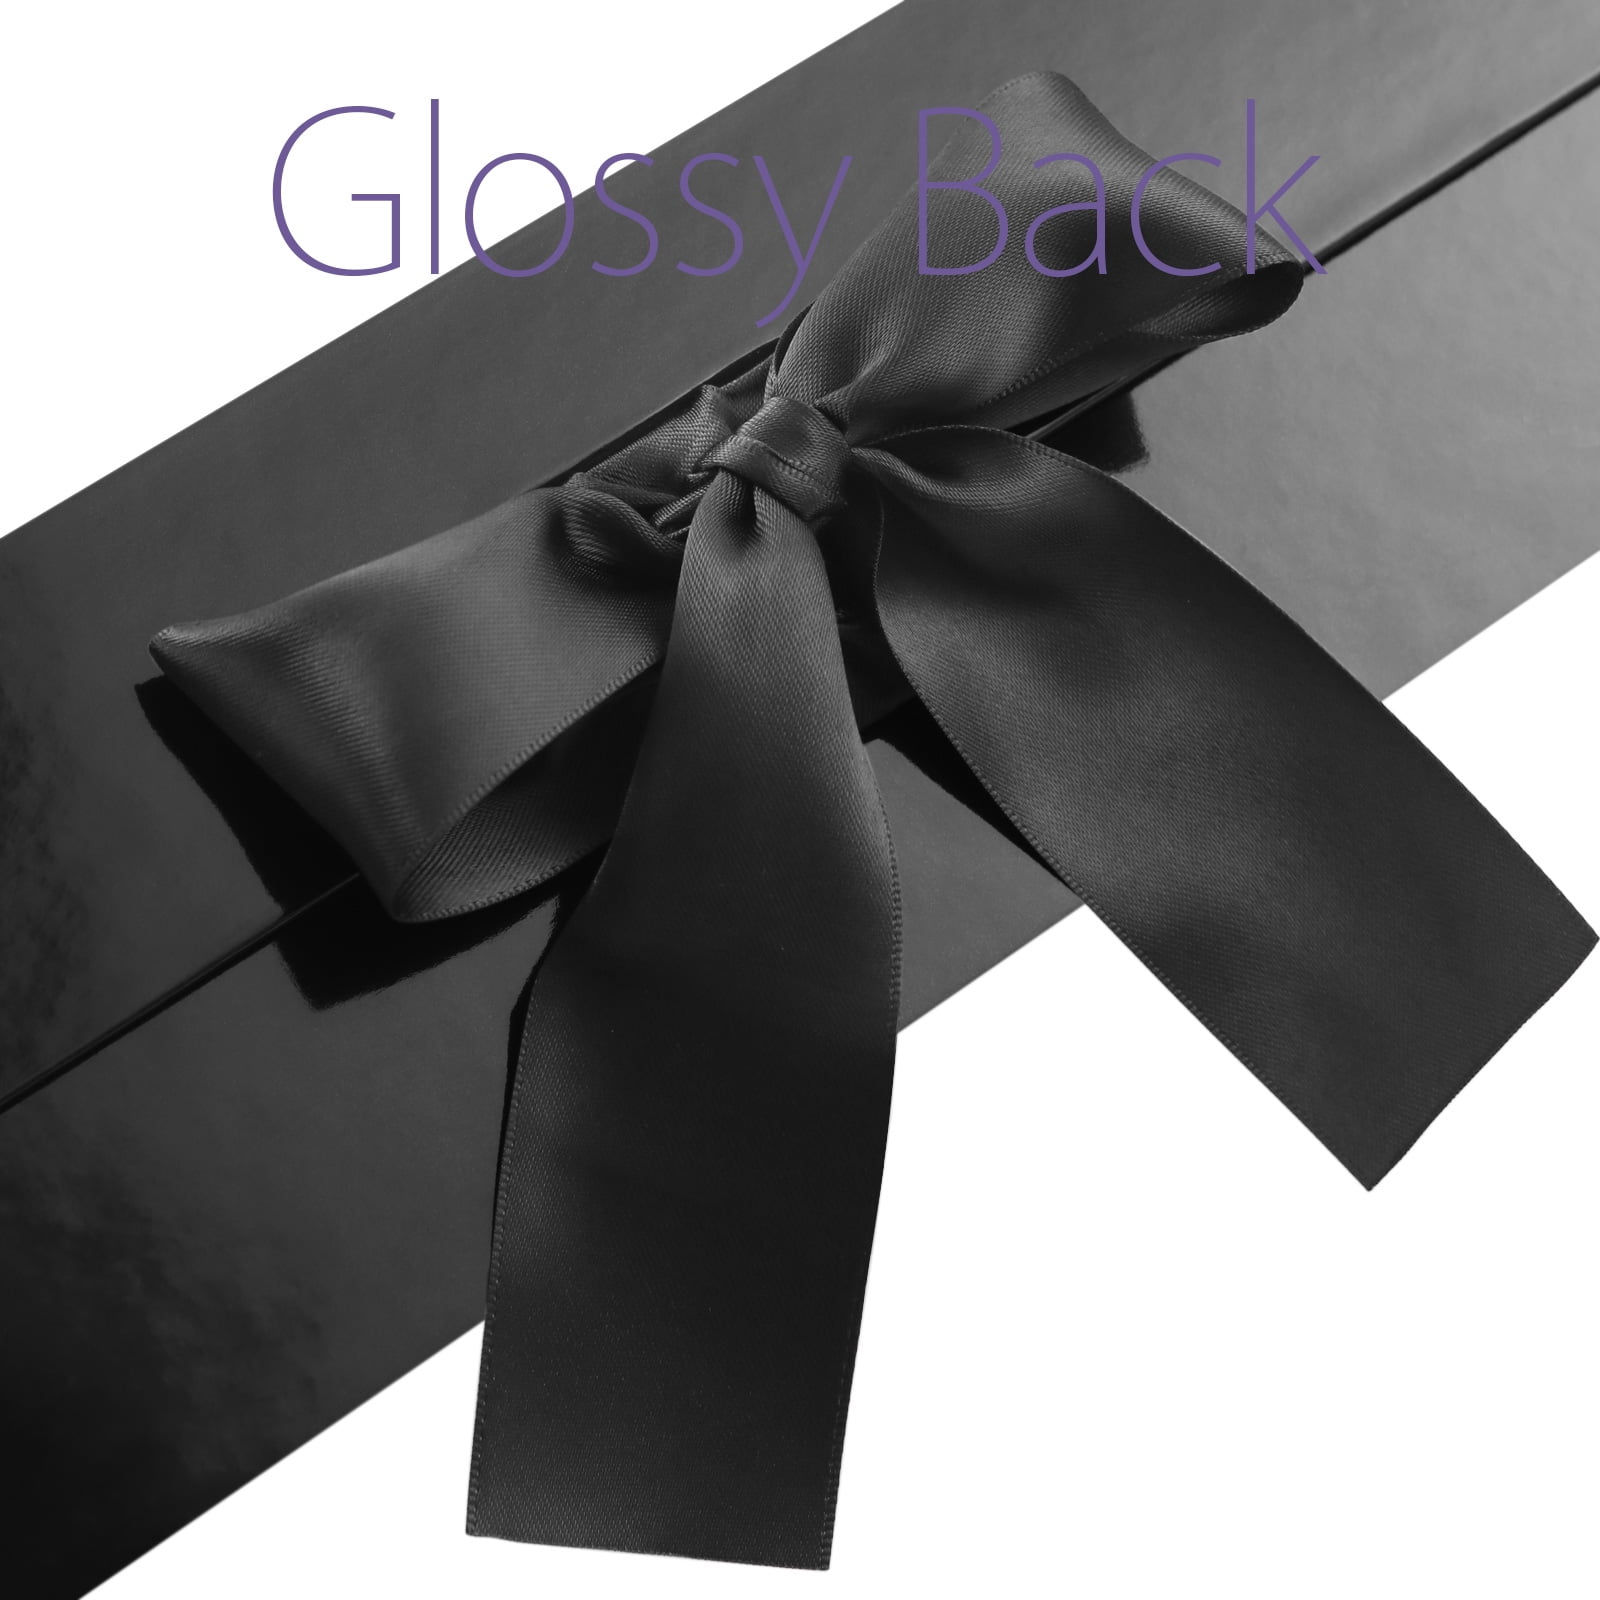 50mm Wide Black Ribbon for Gift Wrapping,22M 2Inch Ribbon Black